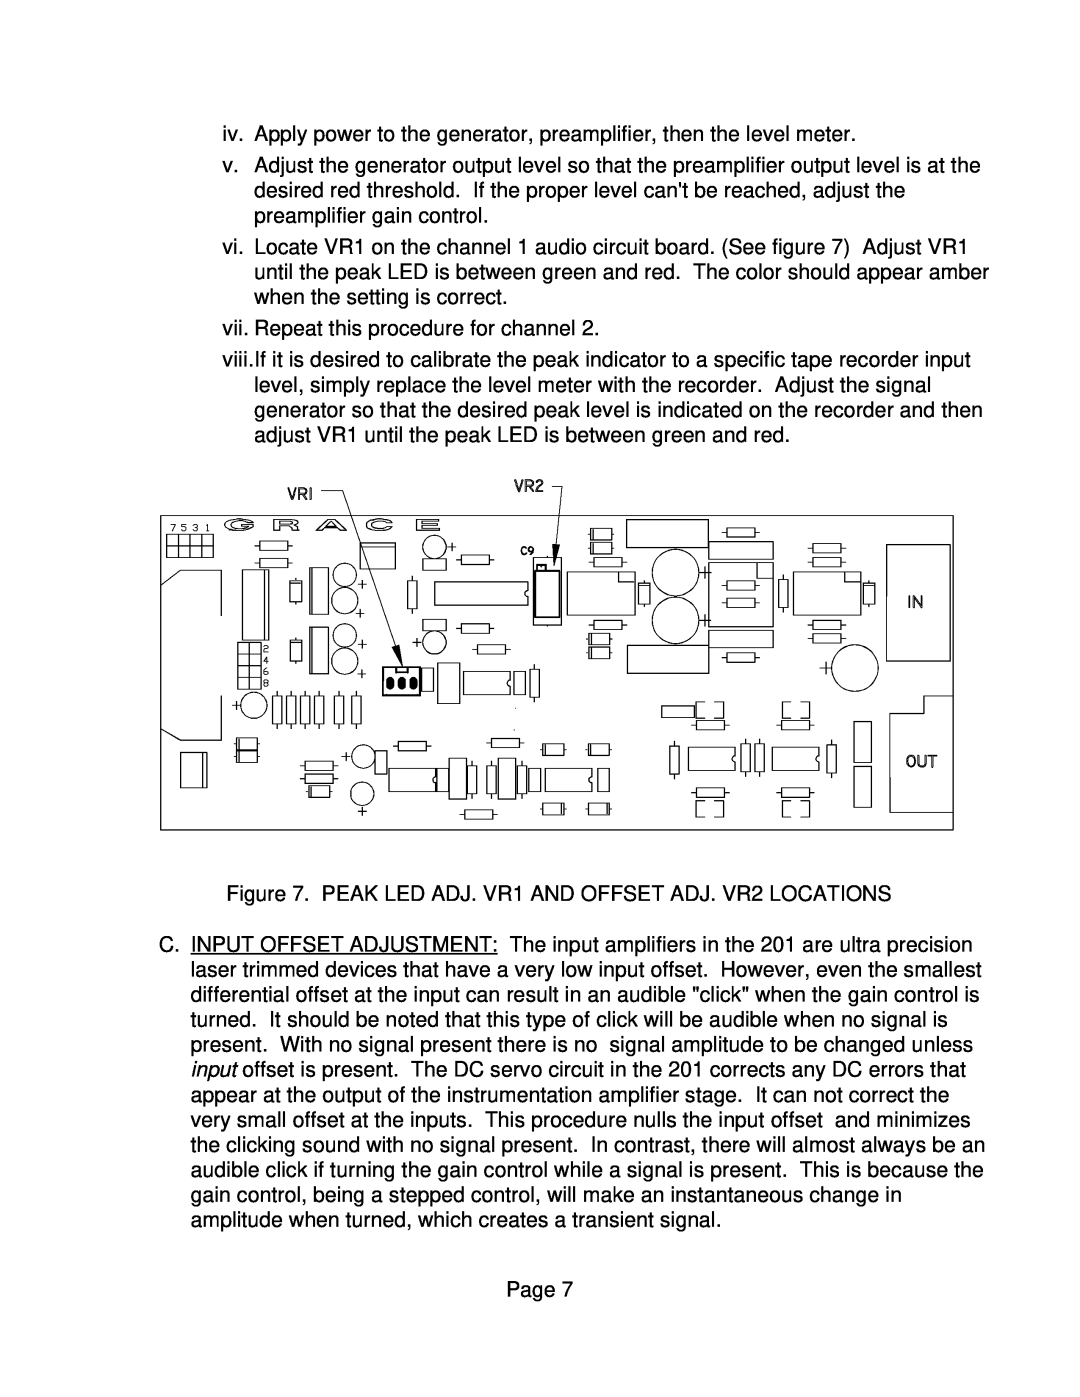 Microplane 201 owner manual vii.Repeat this procedure for channel, Page 